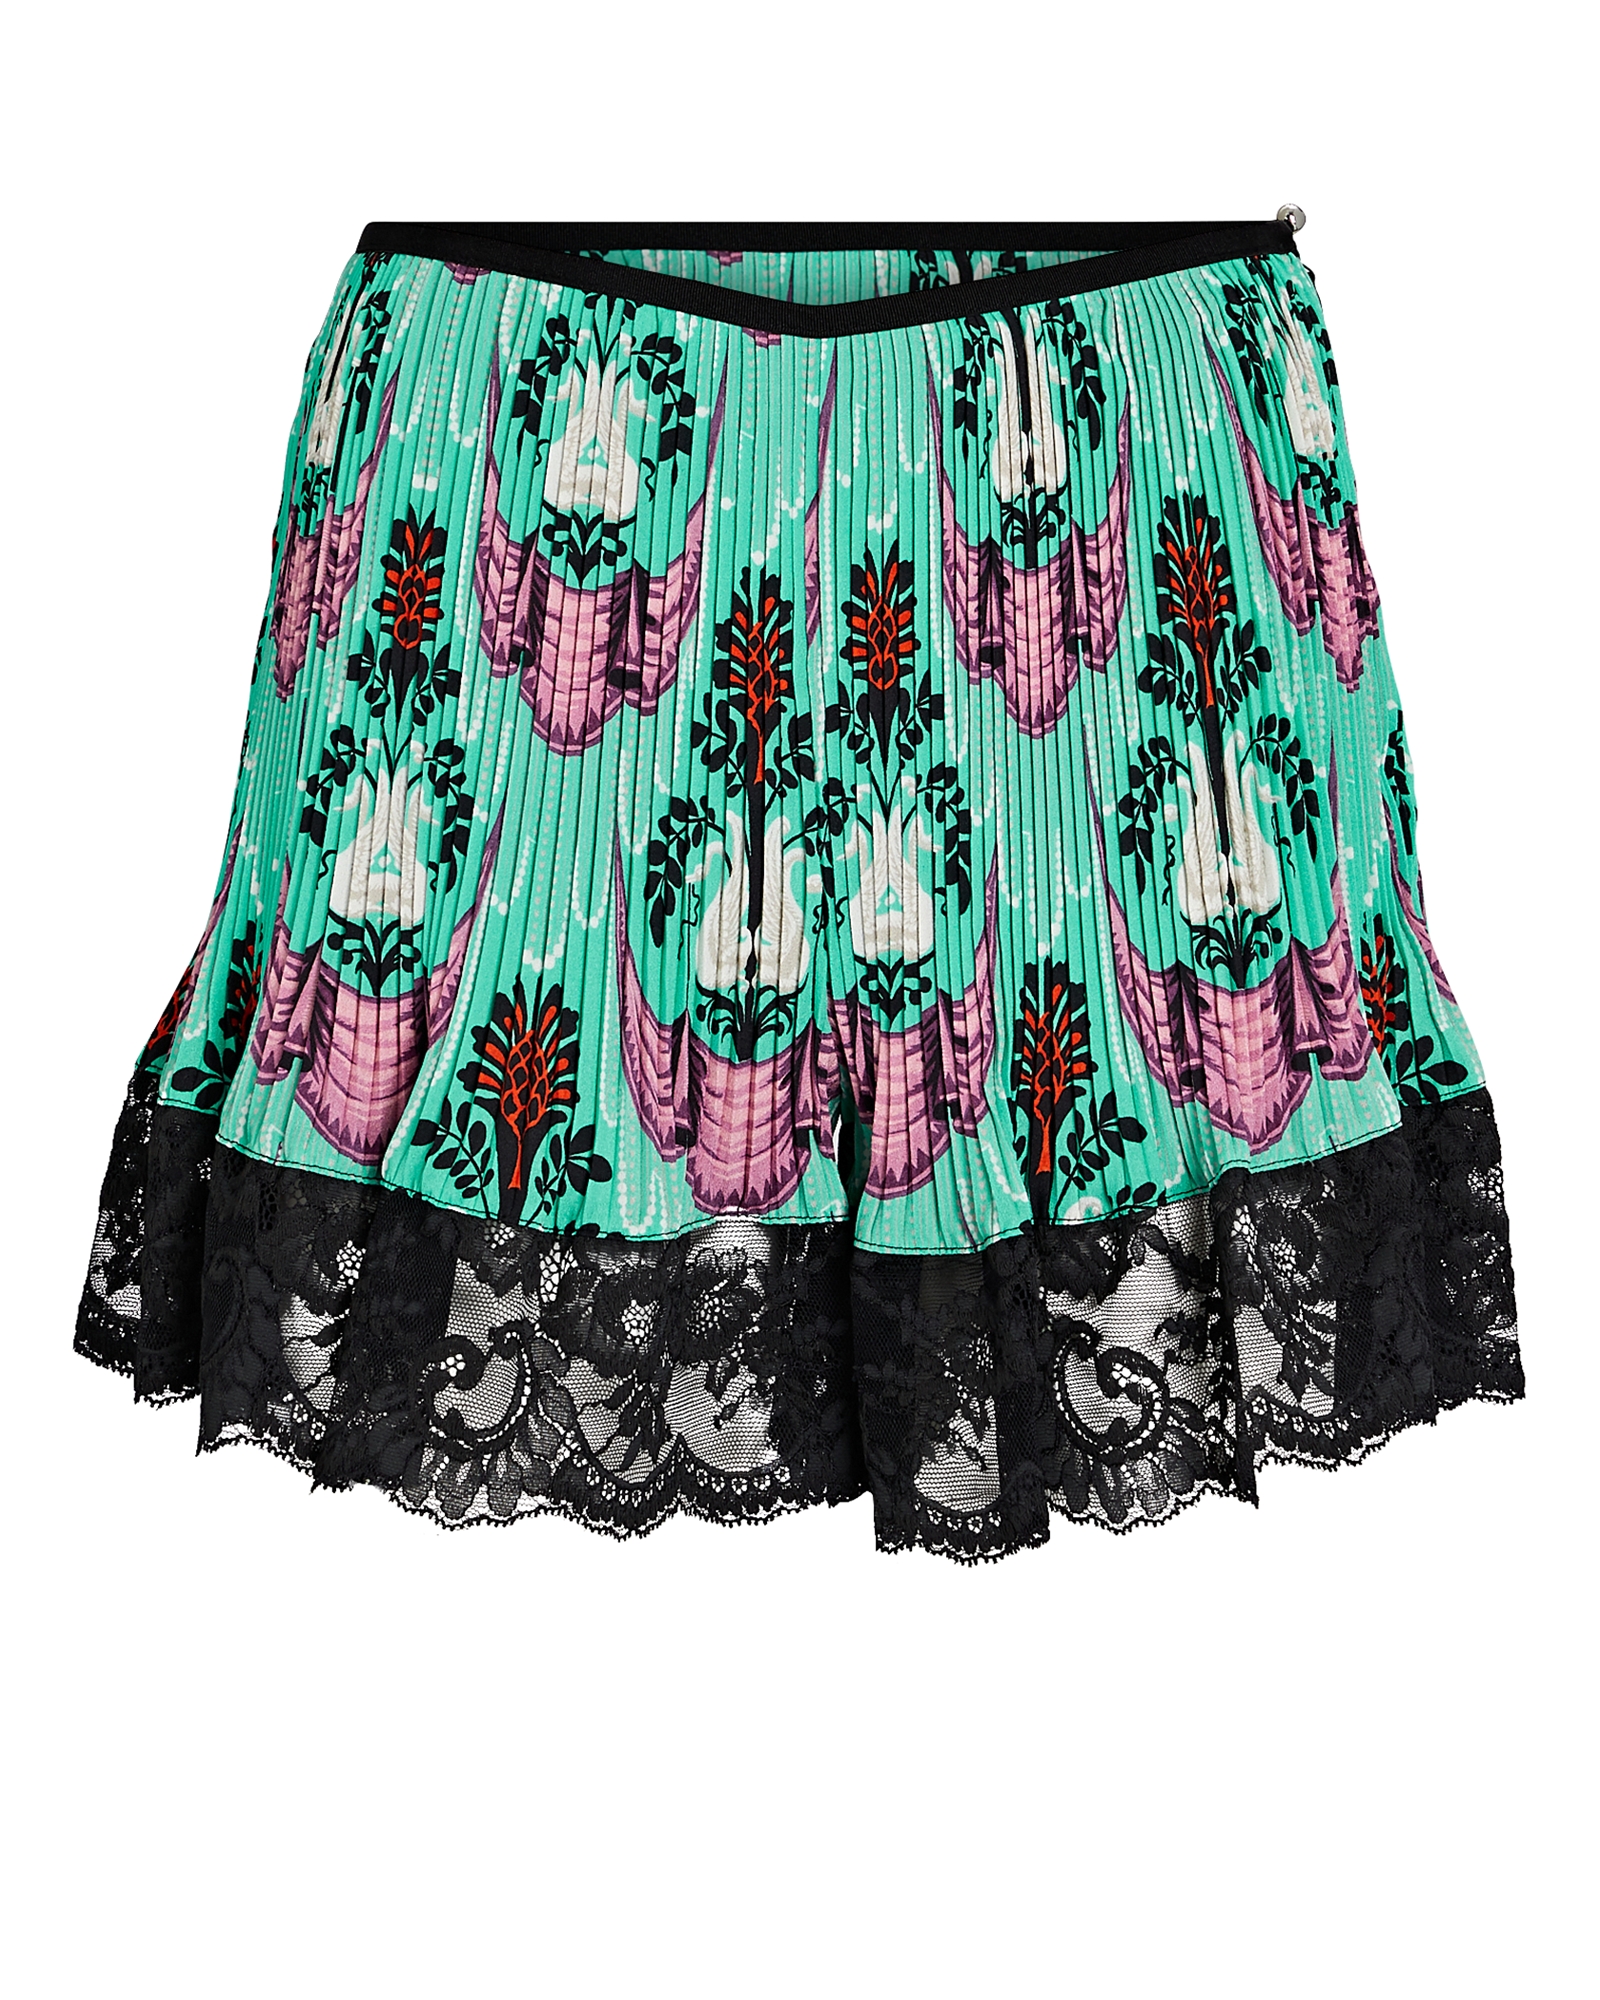 Paco Rabanne Lace-Trimmed Printed Shorts | INTERMIX®